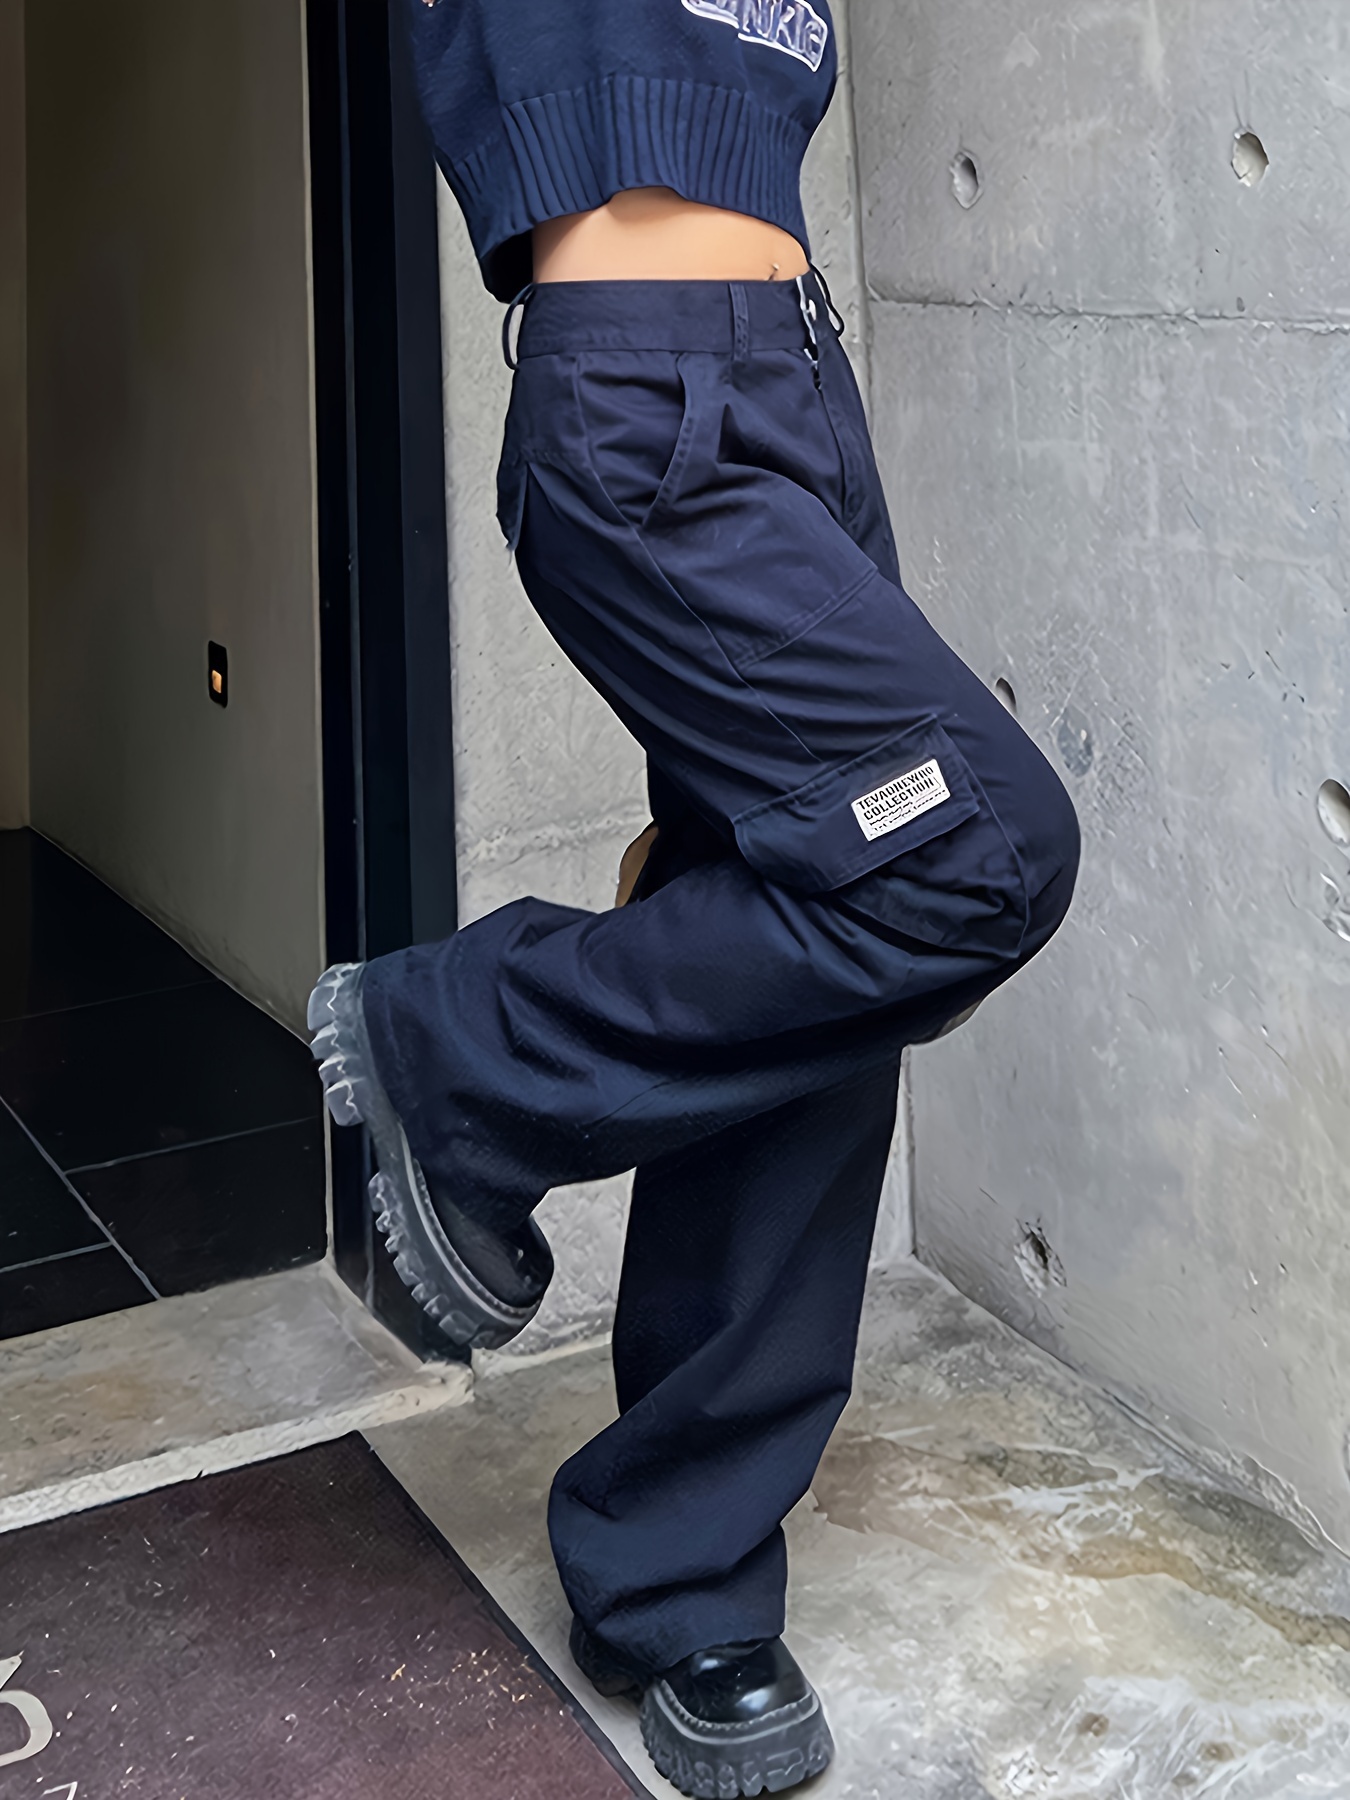 Today Cargo Sweatpants for Women High Waisted Wide Leg Trackpants